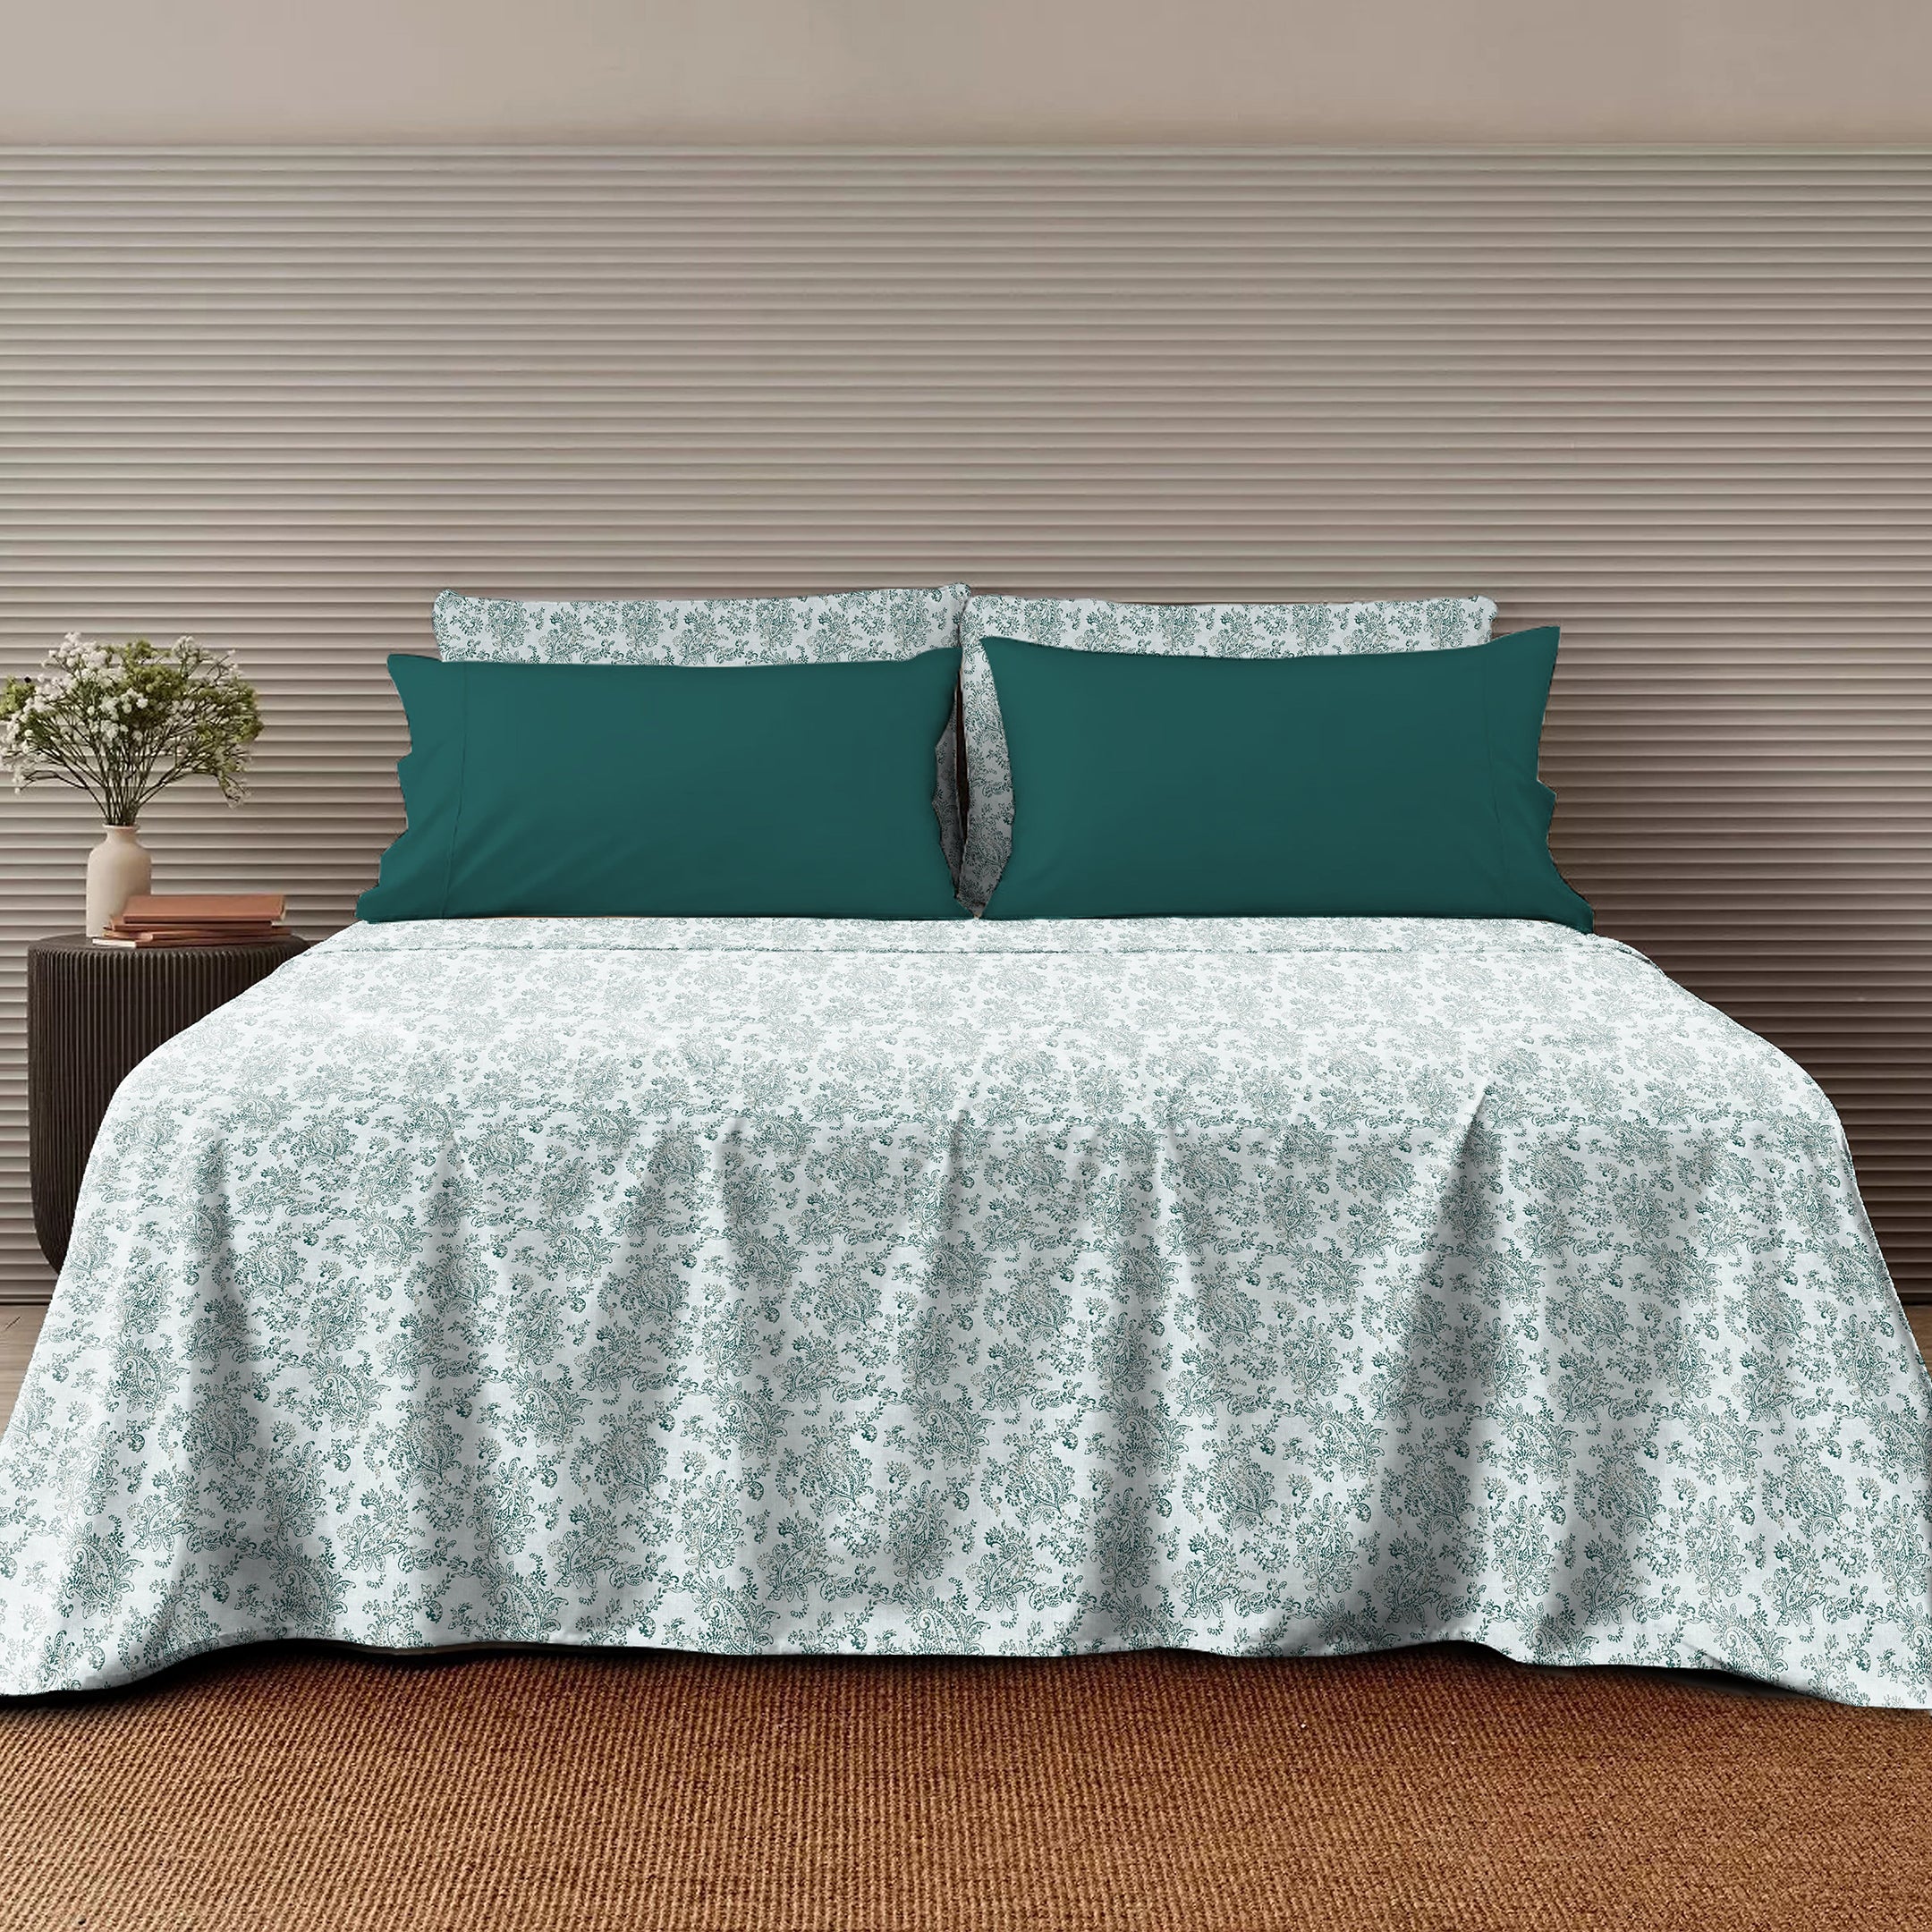 Jodhpur Flowers Bedsheet for Double Bed with 2 PillowCovers King Size (104" X 90") White And Teal